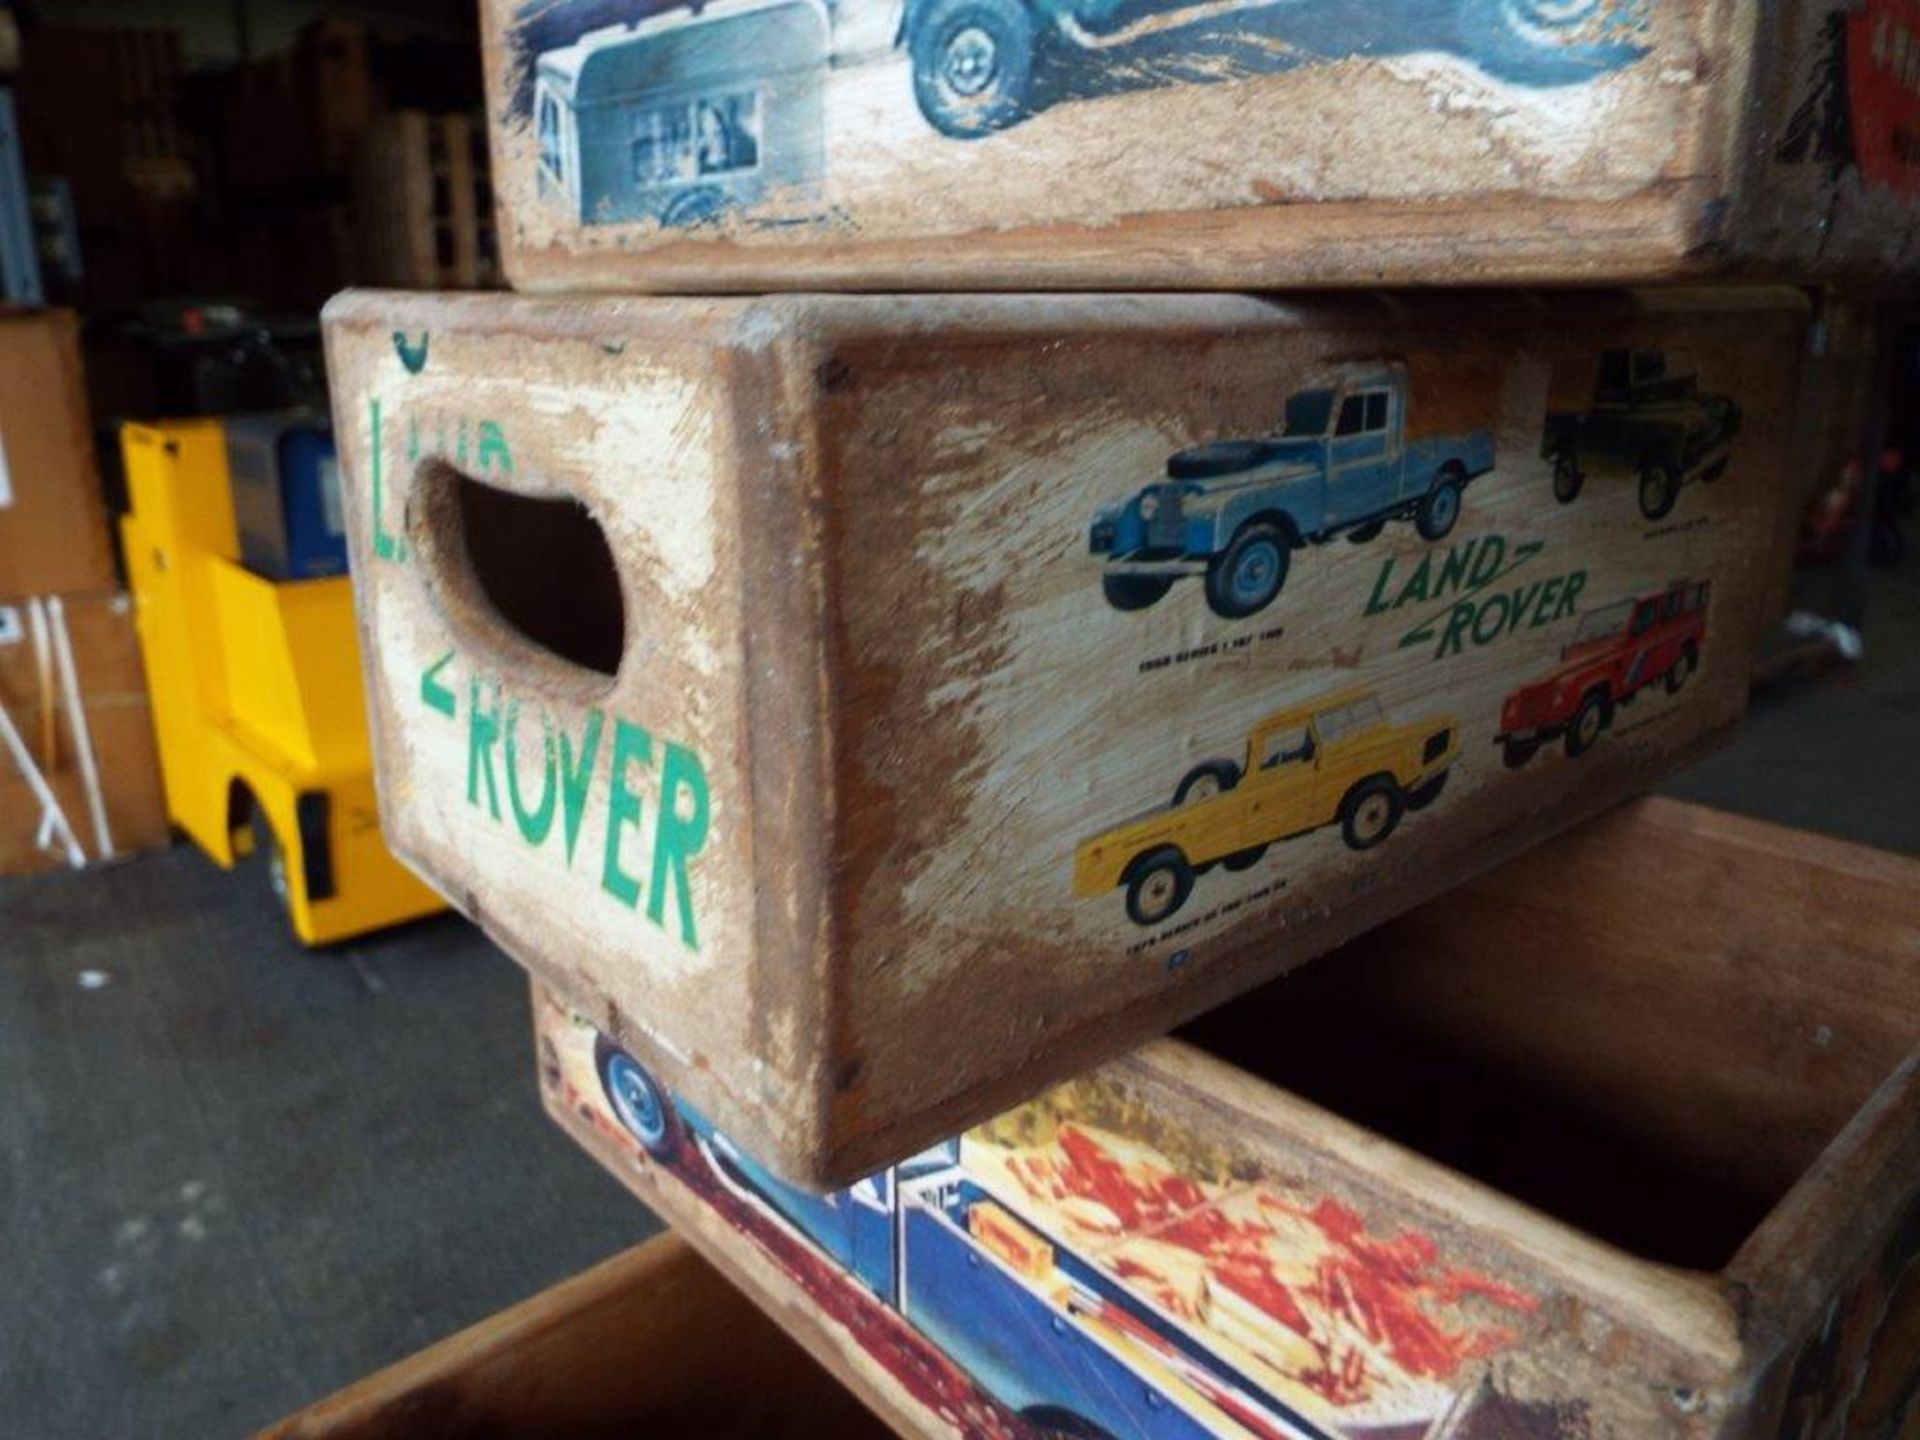 5 x Land Rover Wooden Display / Storage Boxes - Image 5 of 8